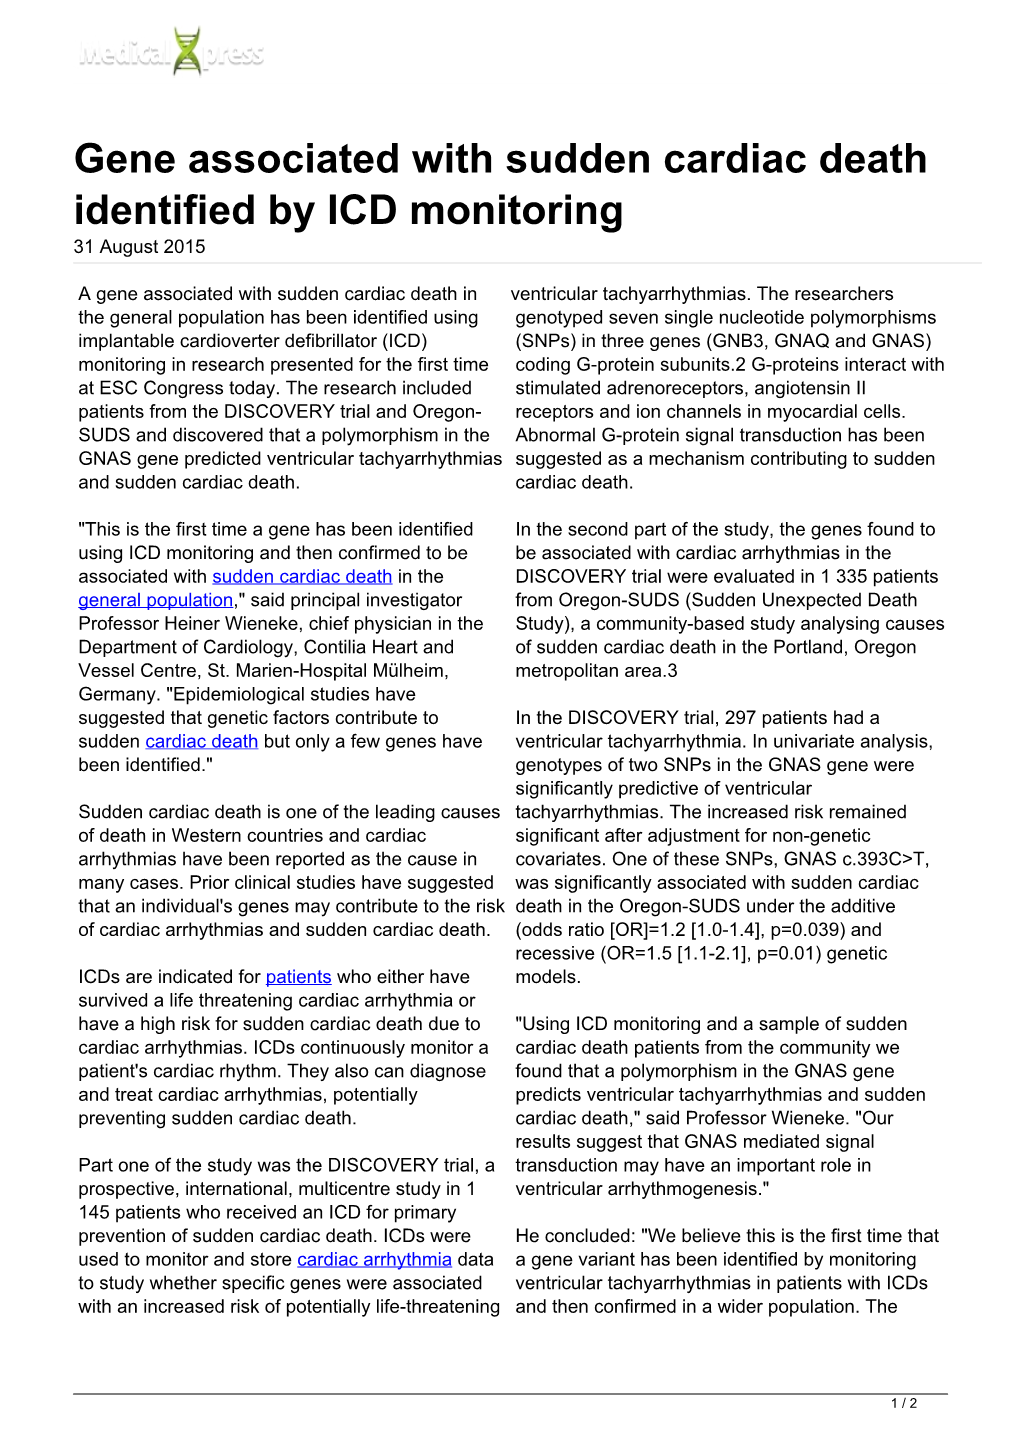 Gene Associated with Sudden Cardiac Death Identified by ICD Monitoring 31 August 2015